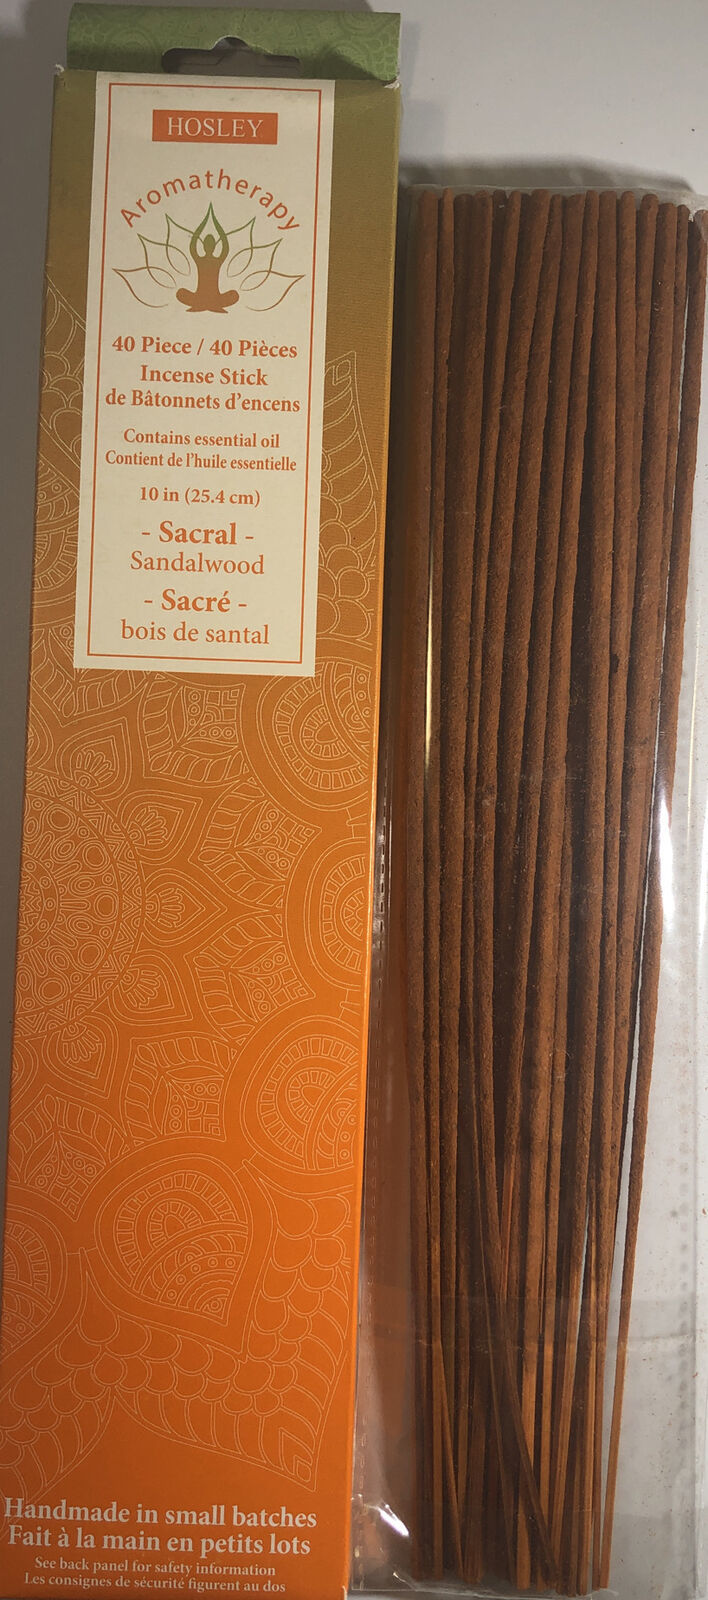 10 in 40pc Hosley Aromatherapy Sandalwood/Sacral Incense Stick From India-SHIP24 - $9.78